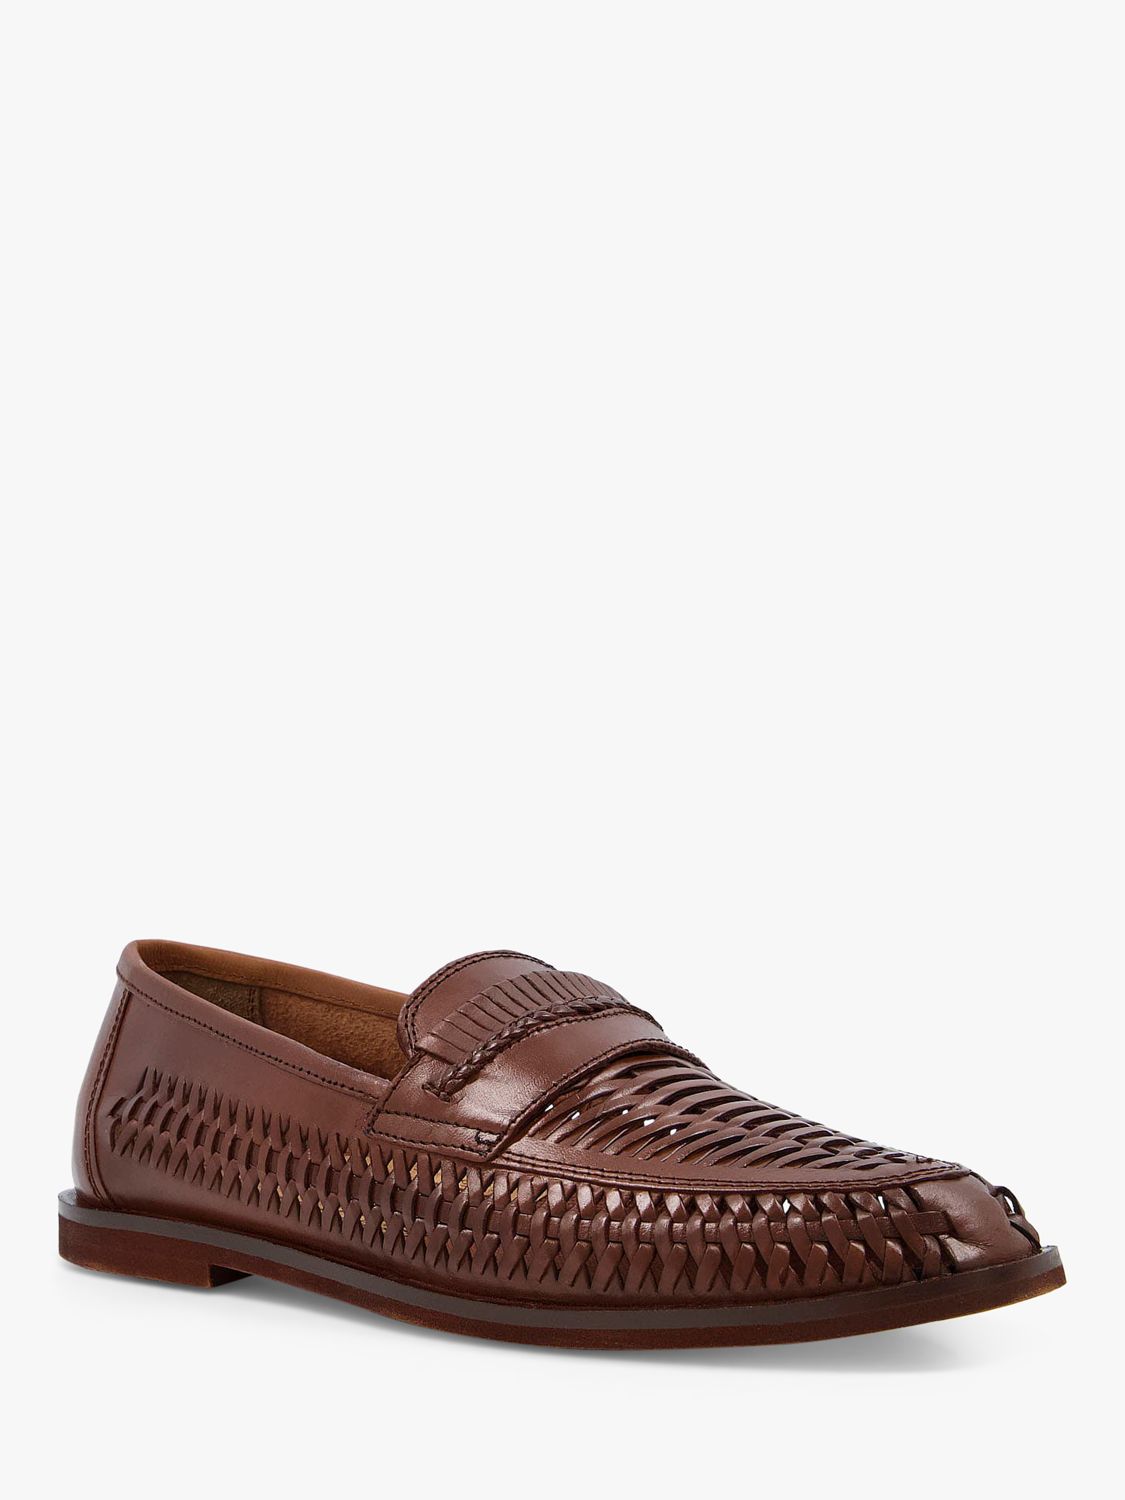 Dune Woven Leather Loafers, Tan at John Lewis & Partners